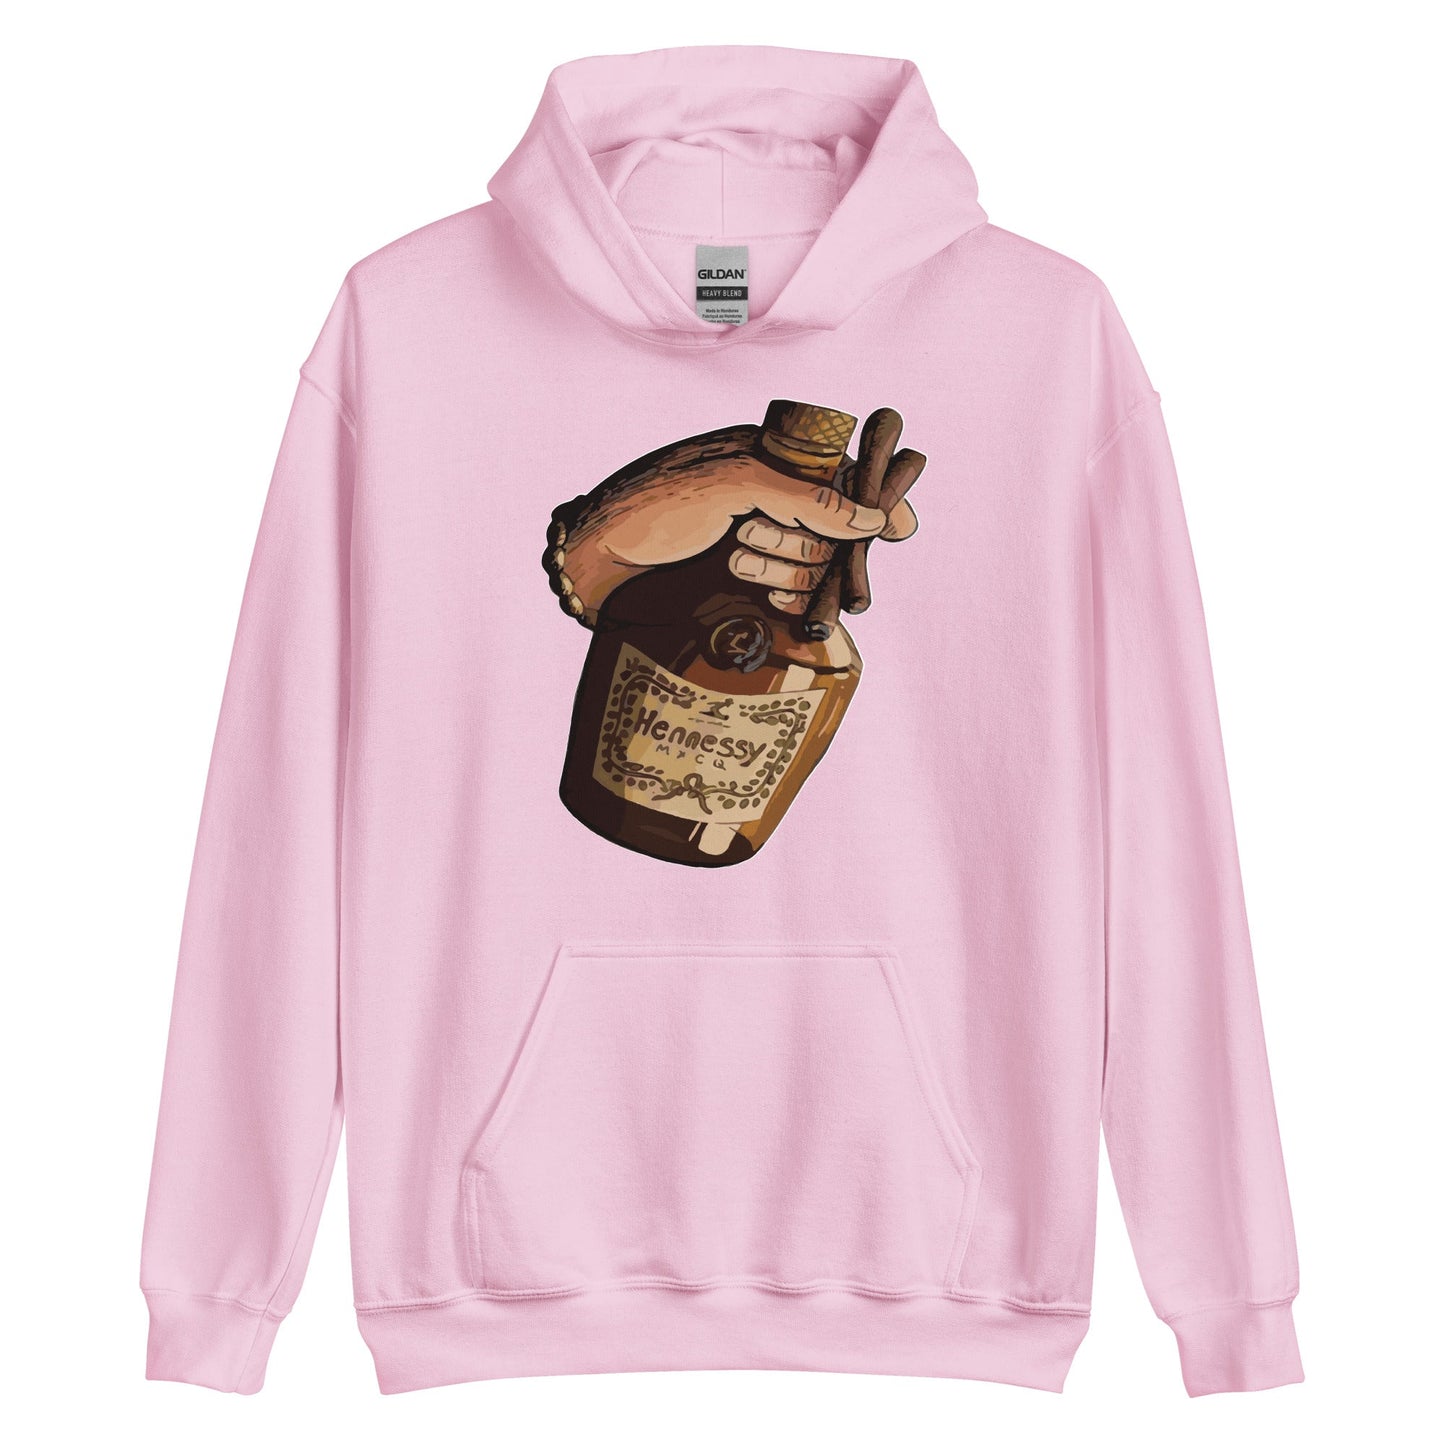 Hennessy Bottle Hoodie - The Truth Graphics